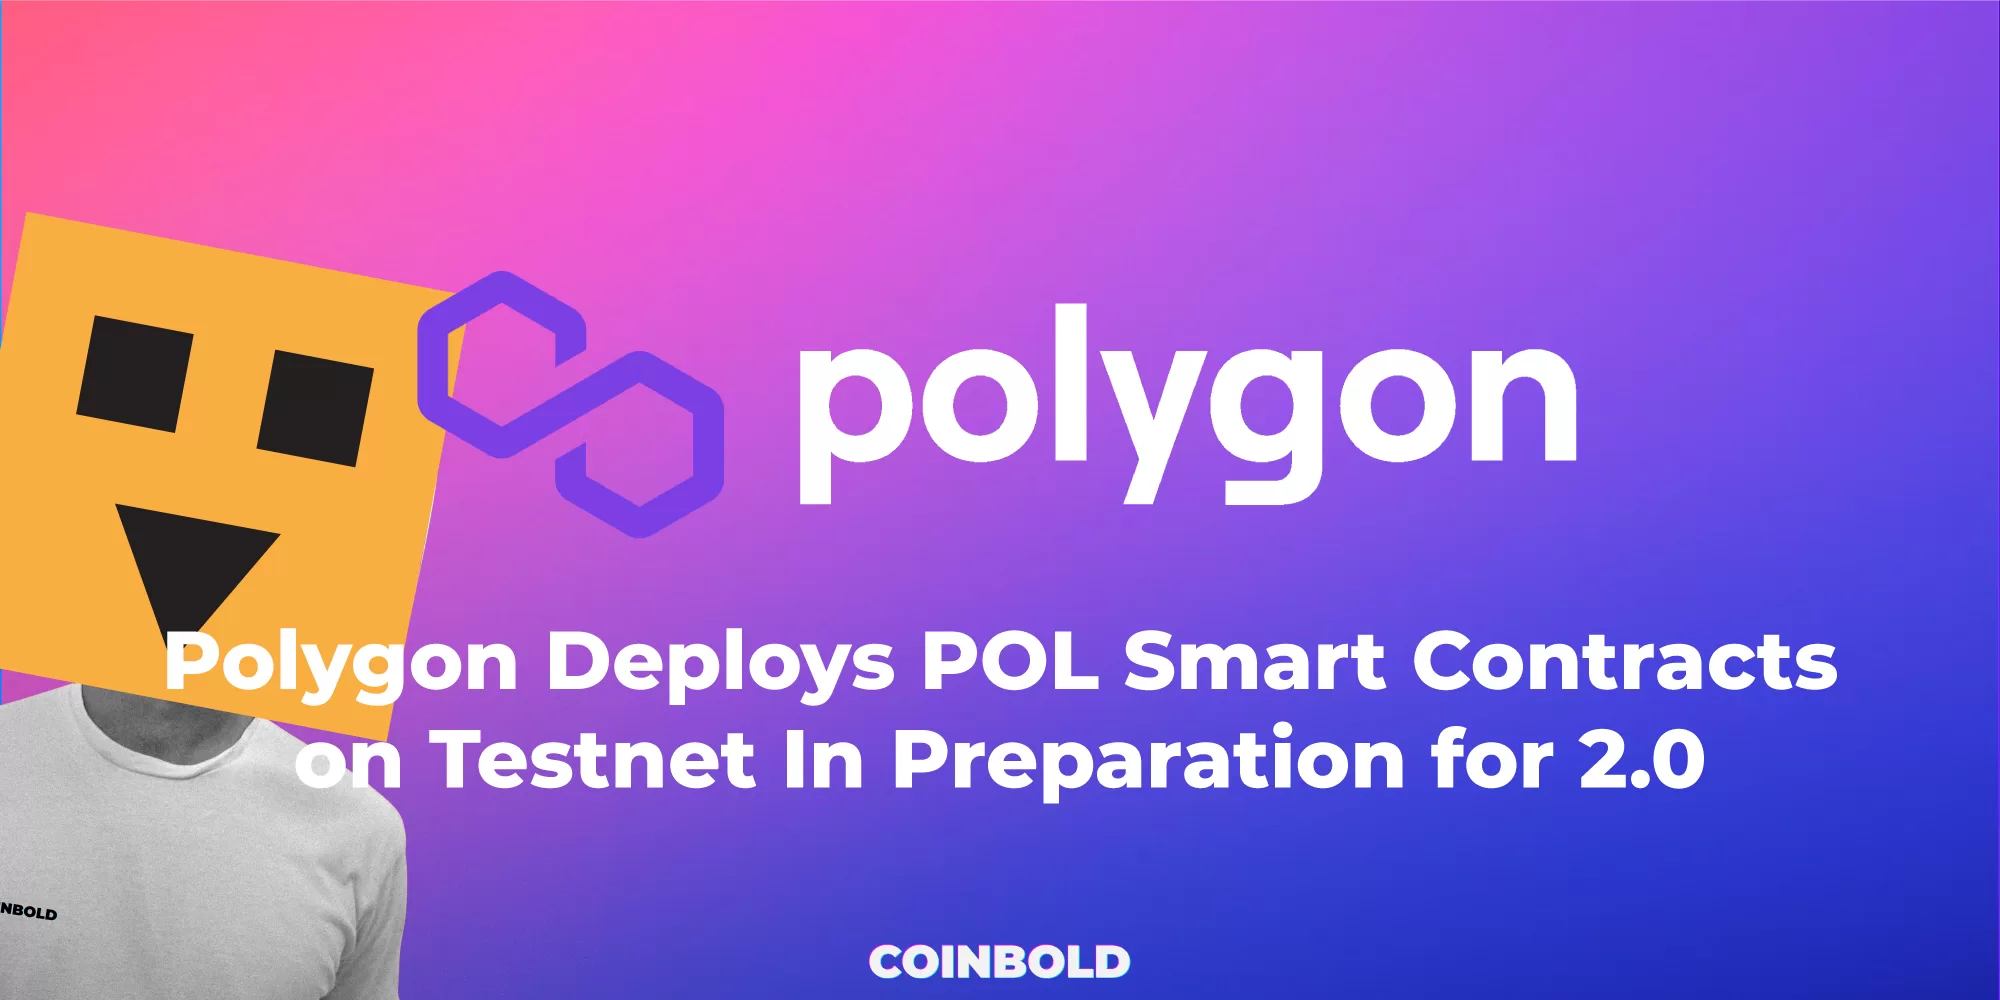 Polygon Deploys POL Smart Contracts on Testnet In Preparation for 2.0